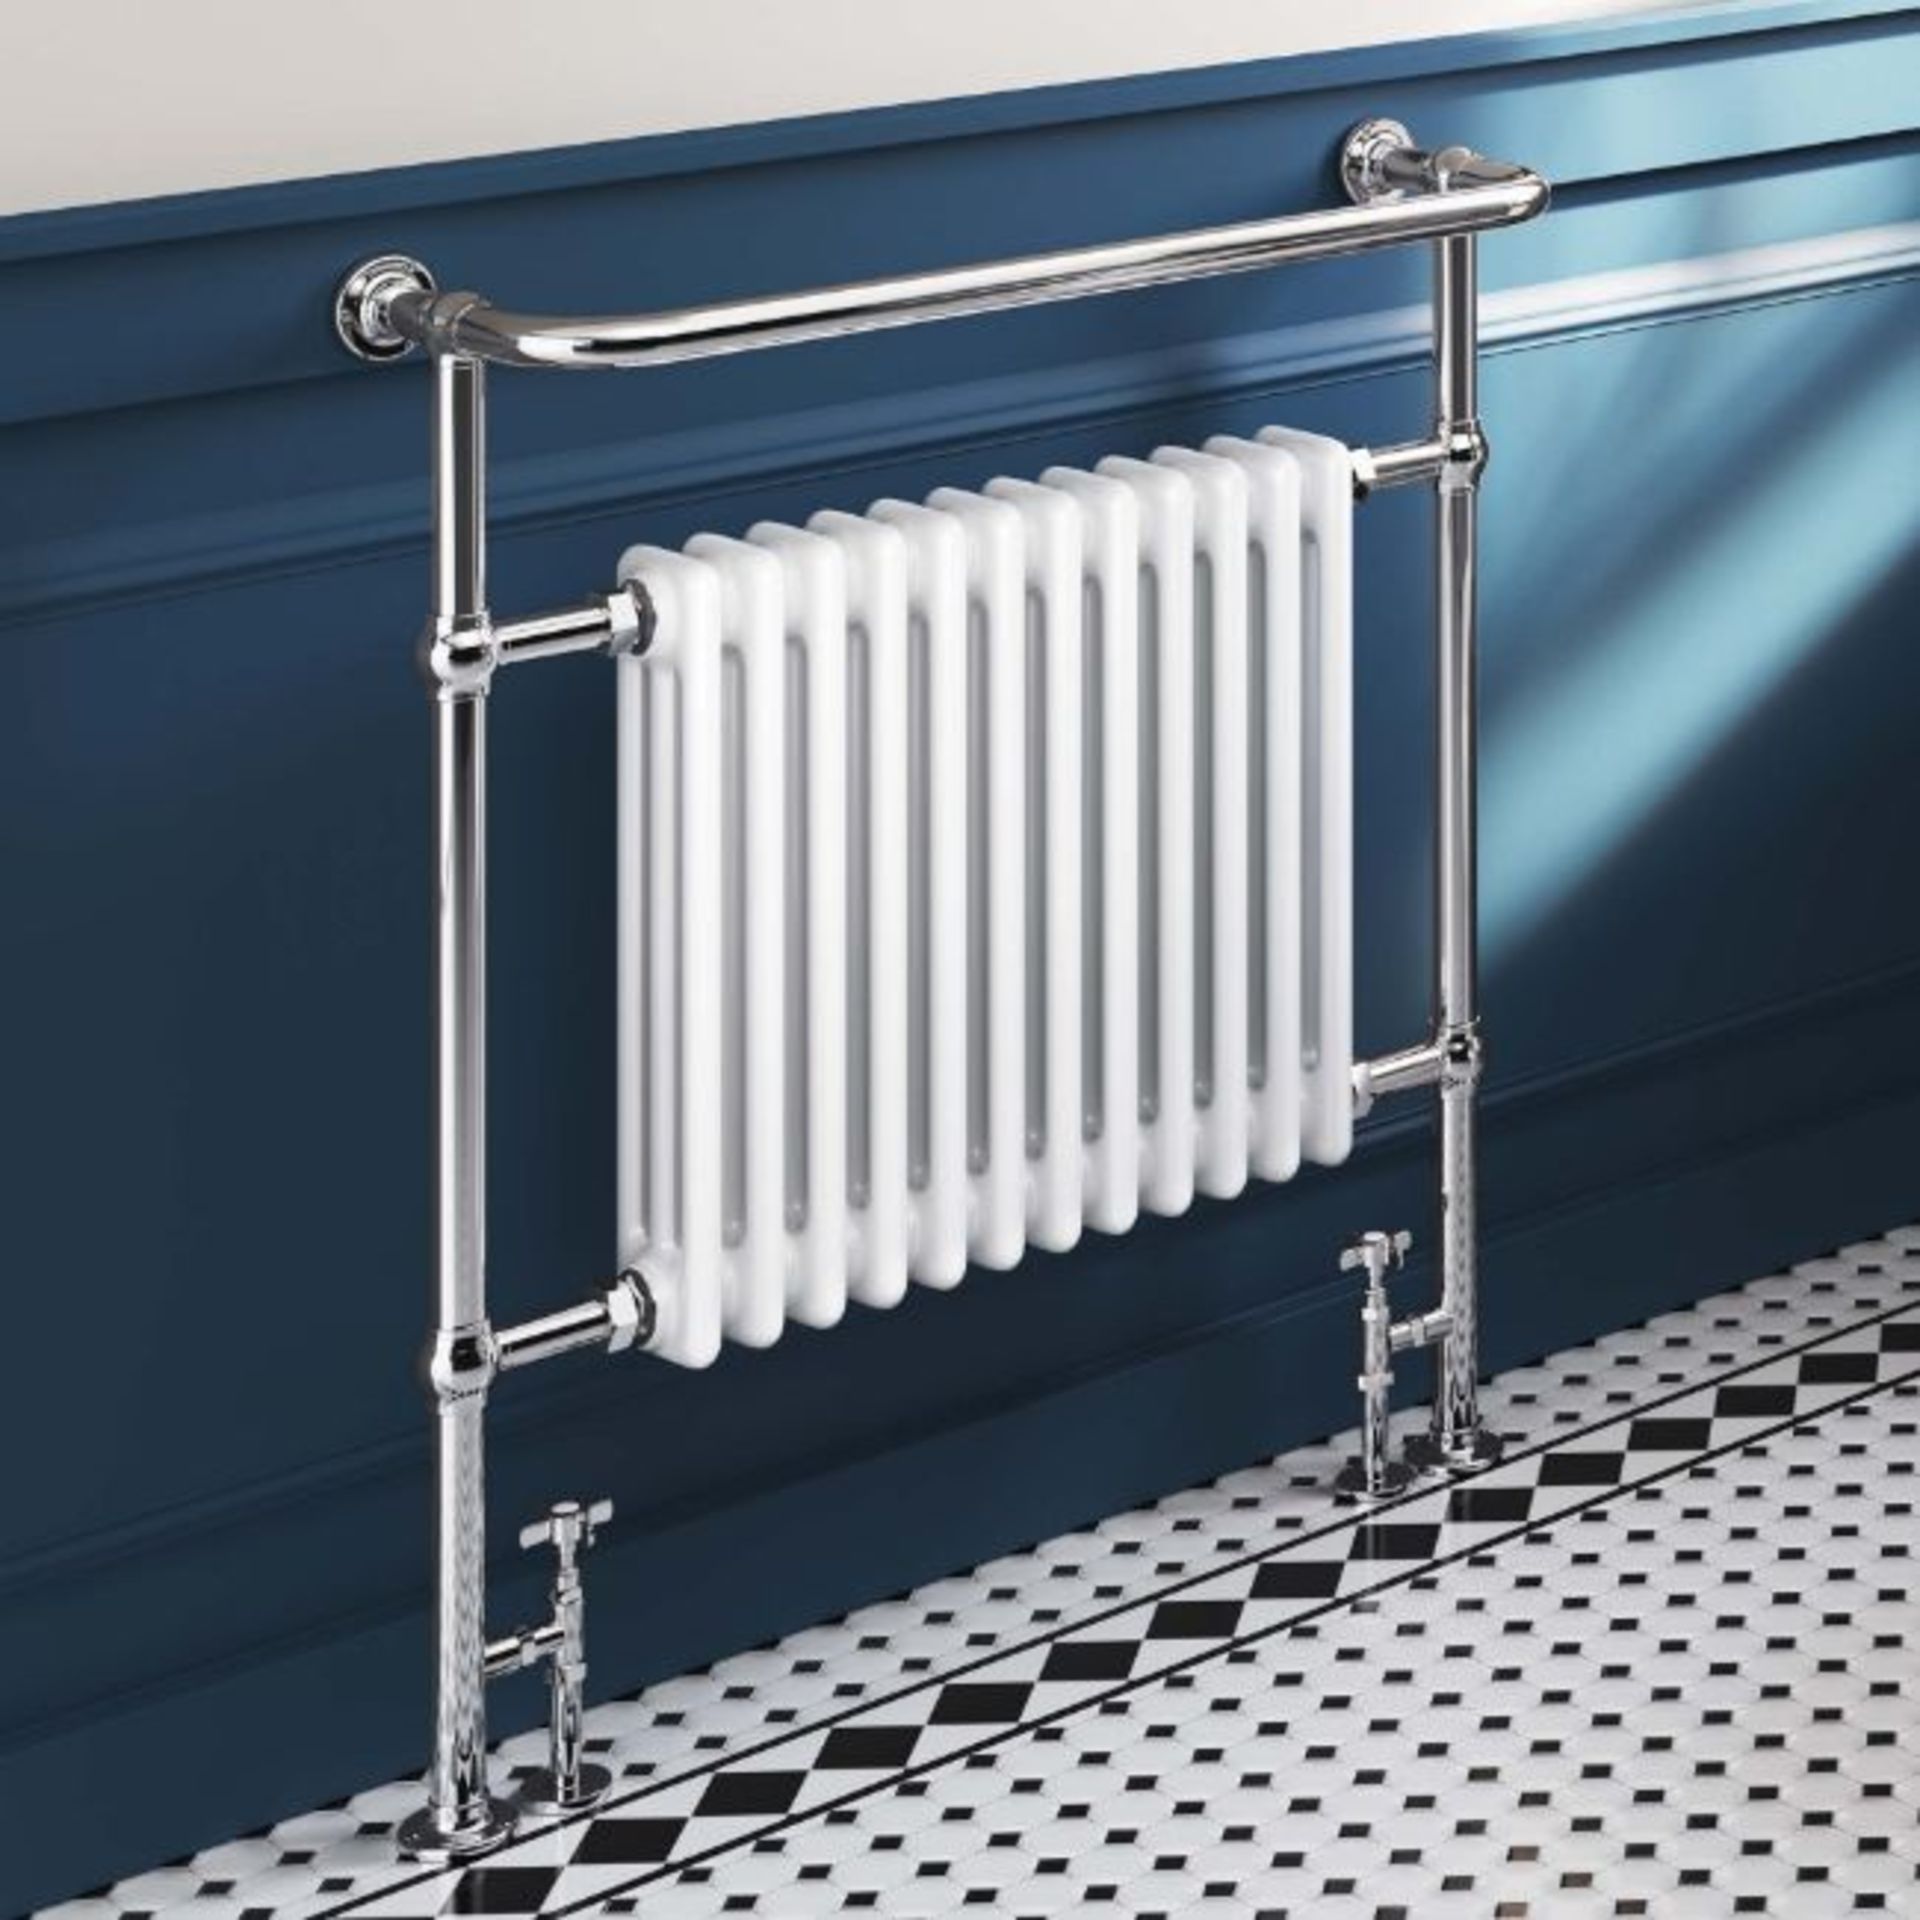 New & Boxed 952x839mm Large Traditional White Towel Rail Radiator - Victoria Premium. RRP £43...